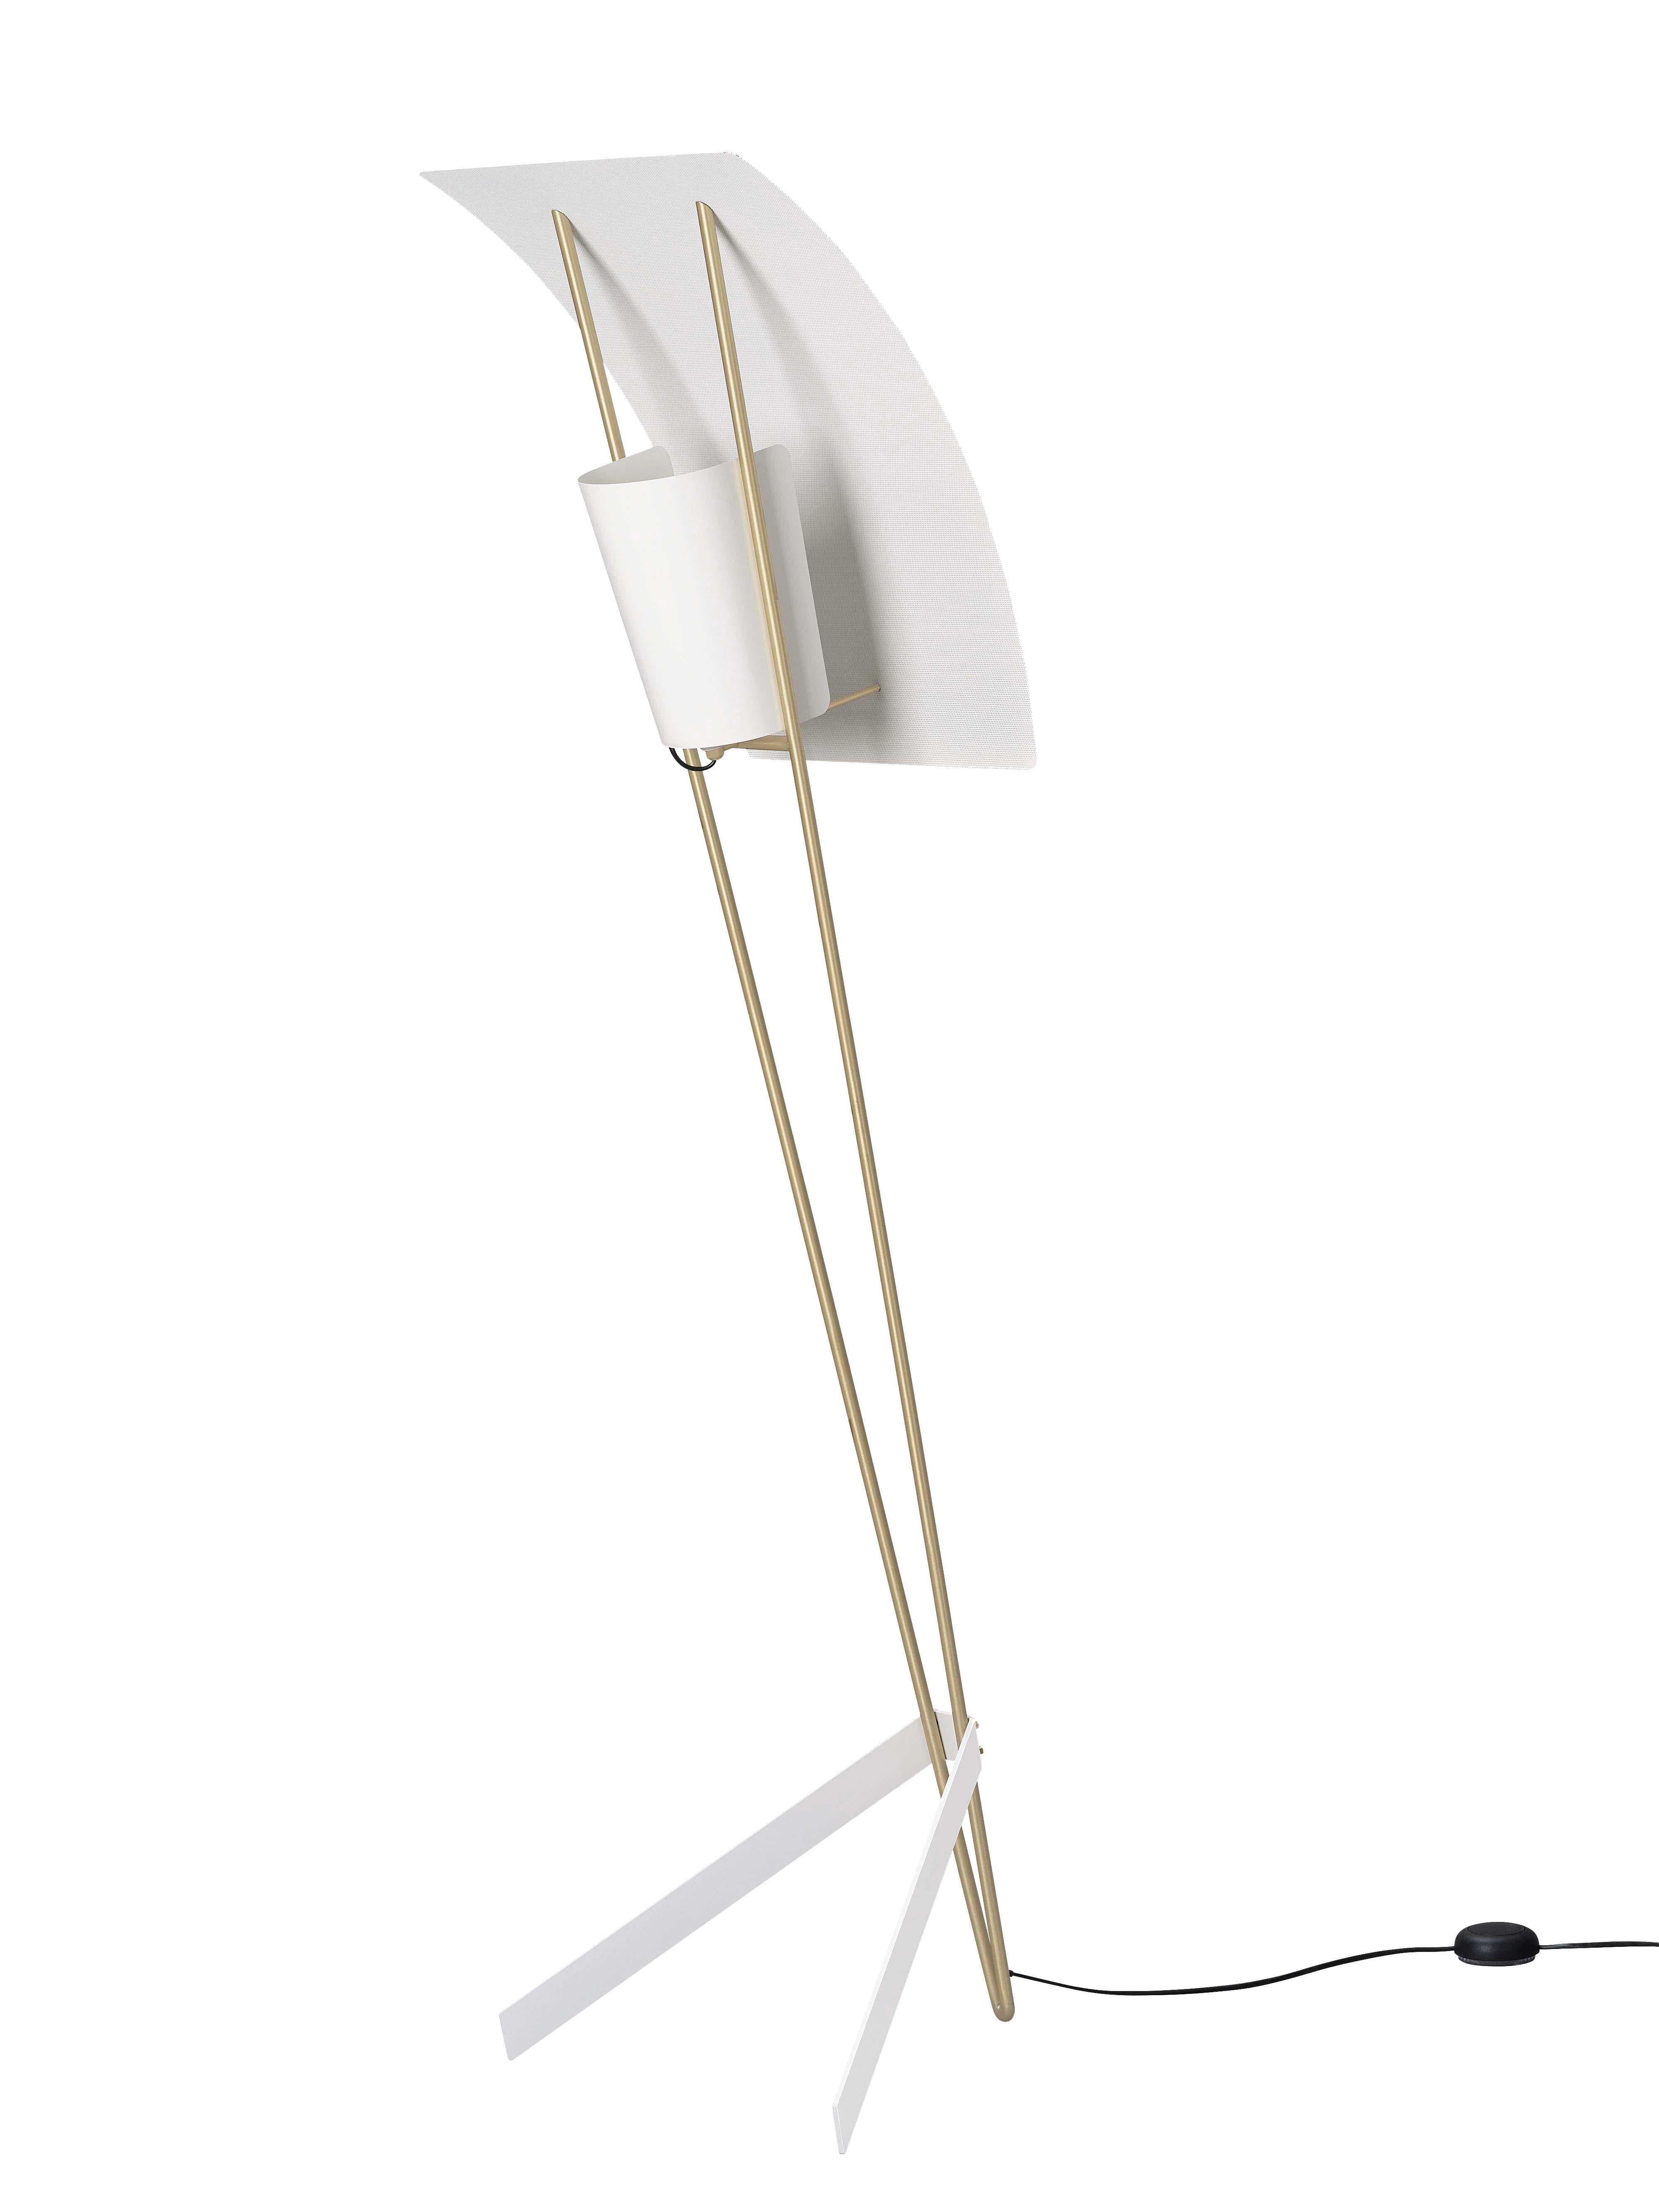 Pierre Guariche Kite Floor Lamp - 4 For Sale on 1stDibs